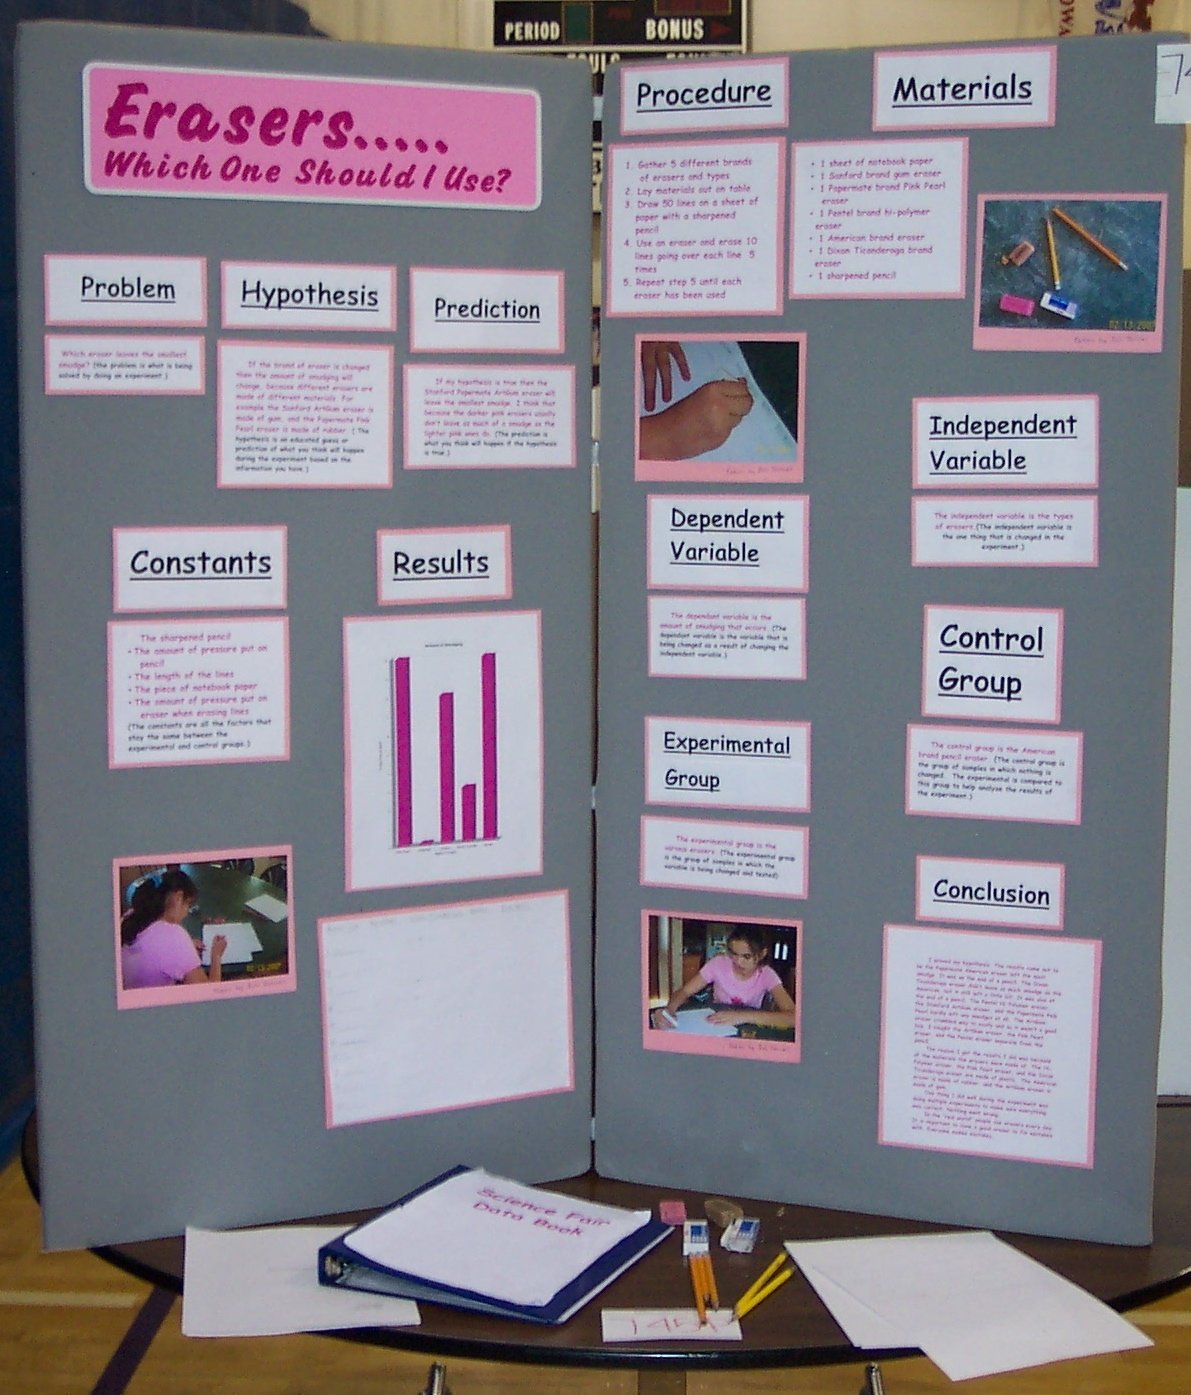 10 Ideal Science Fair Projects For 5Th Grade Ideas 8th grade science project ideas list homeshealth 36 2022